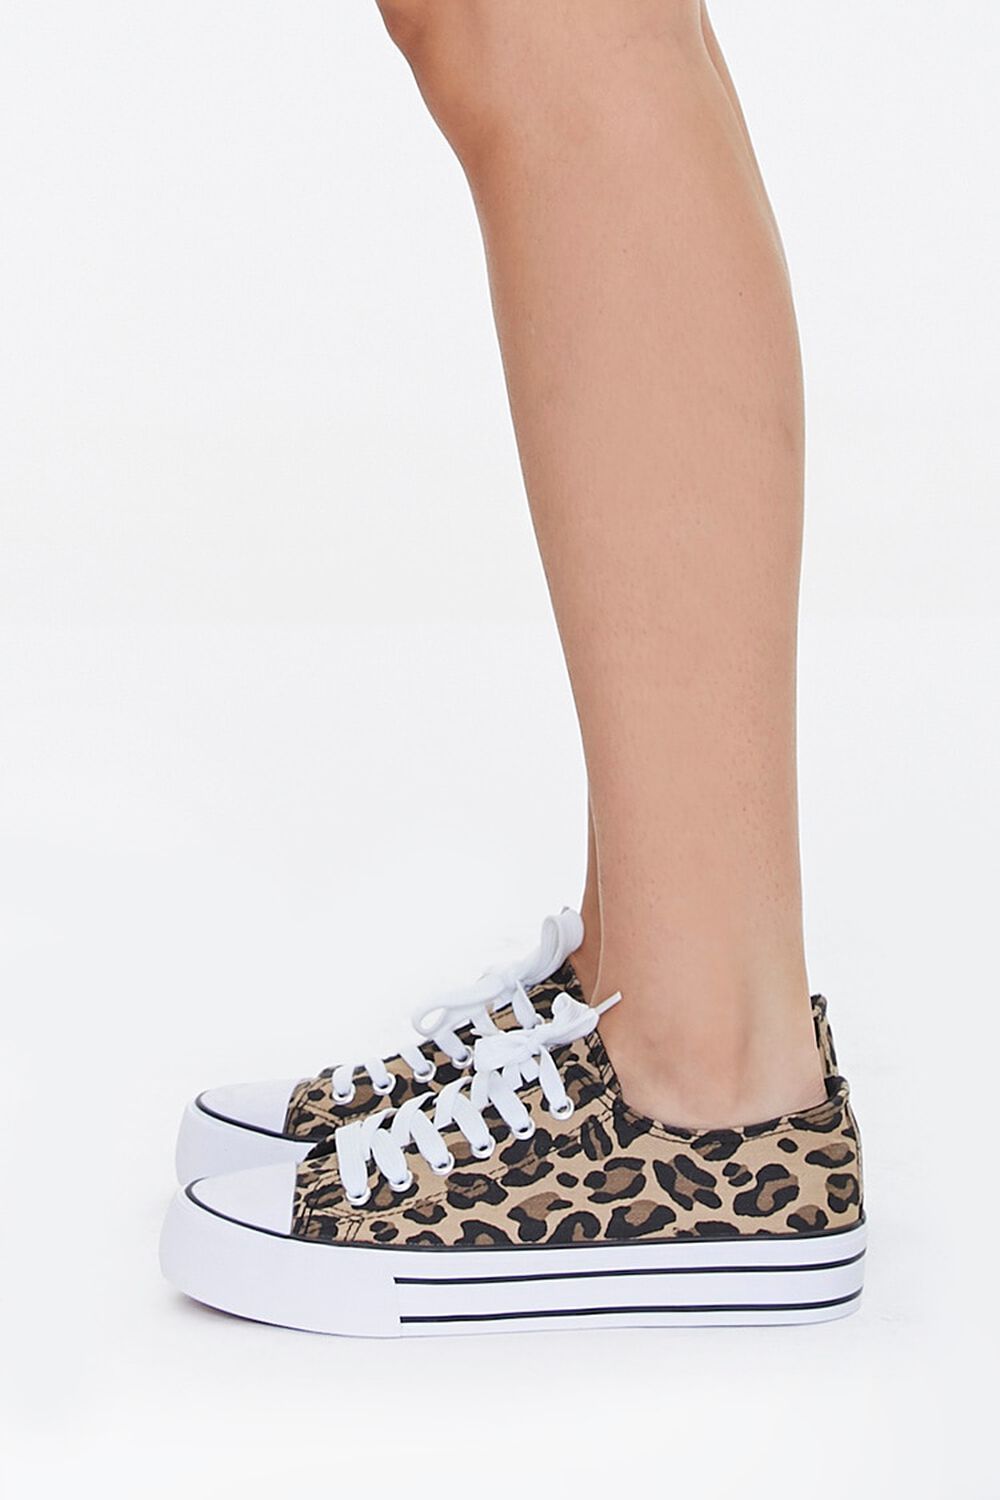 Leopard Print Canvas Sneakers, image 2